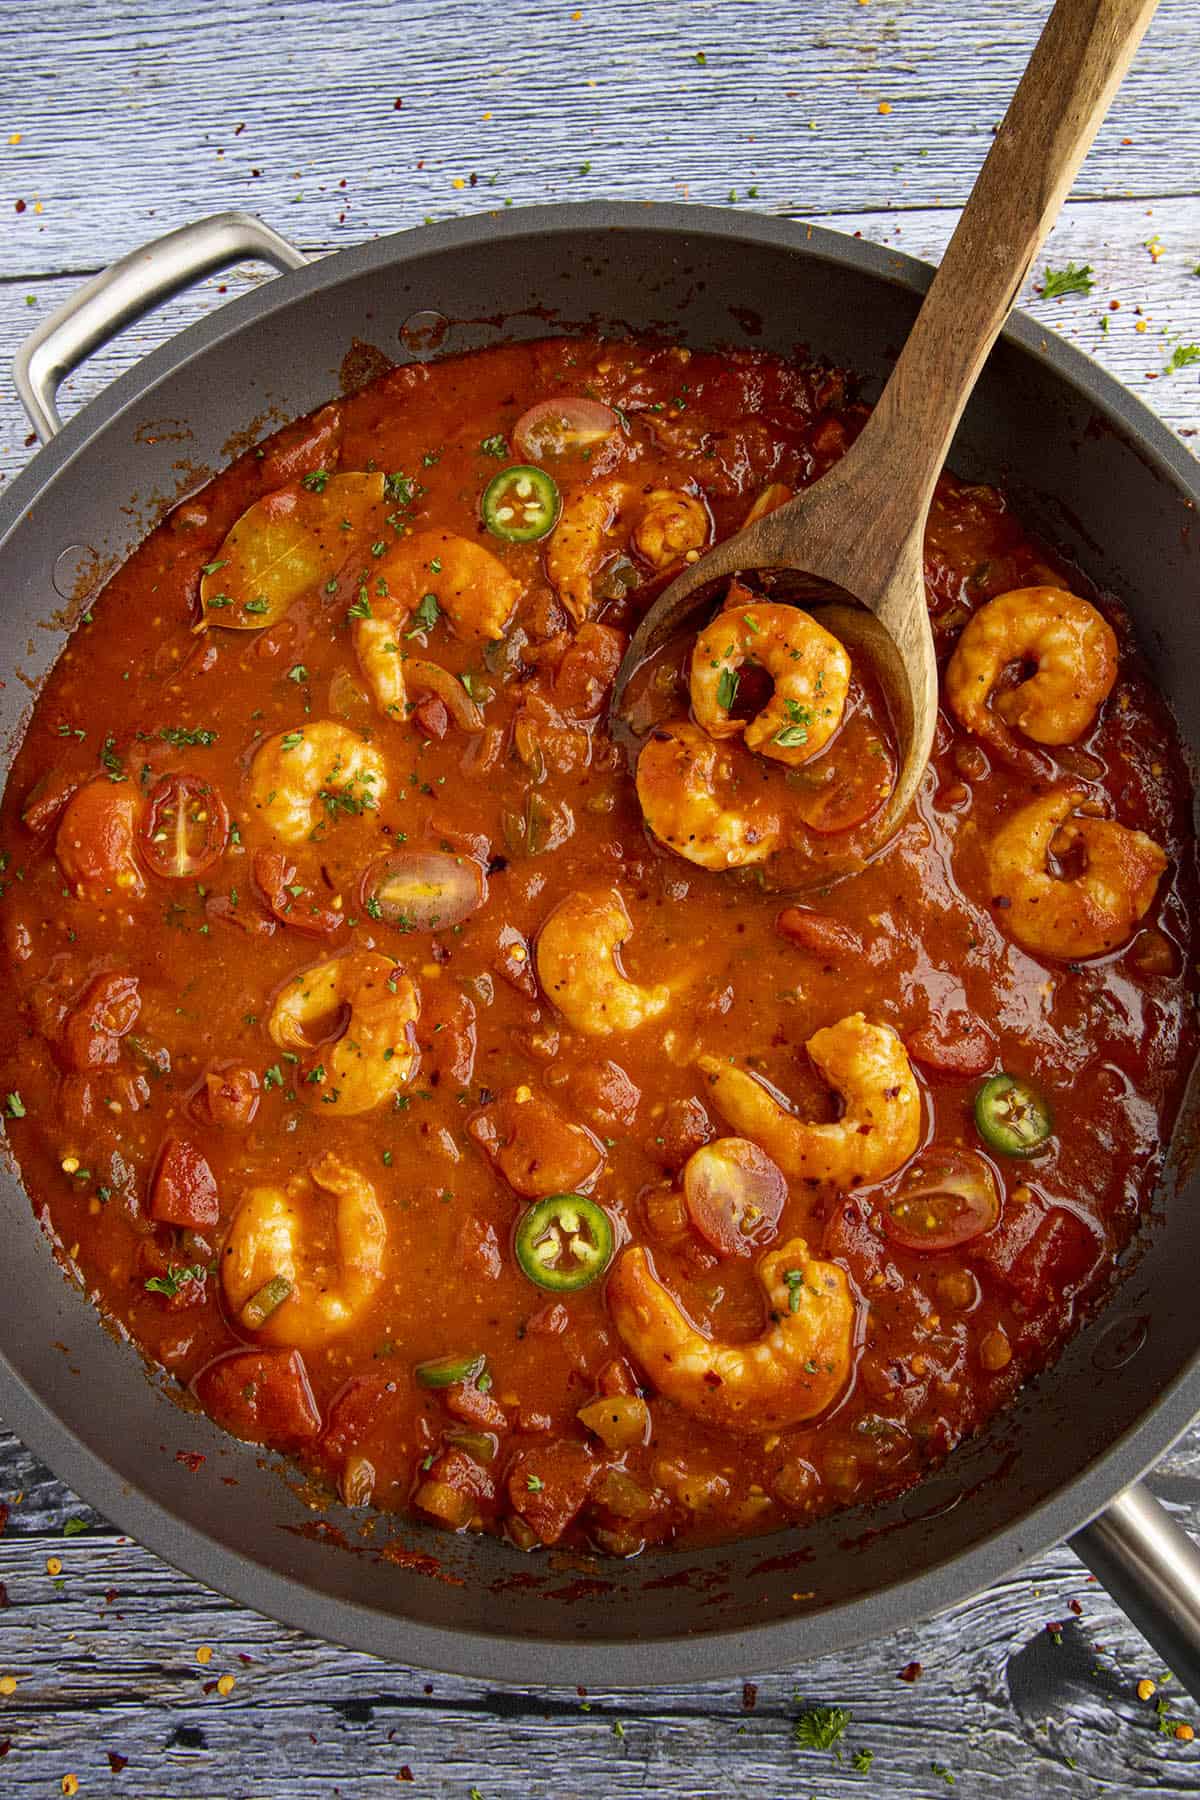 Serving Shrimp Creole from the pan.